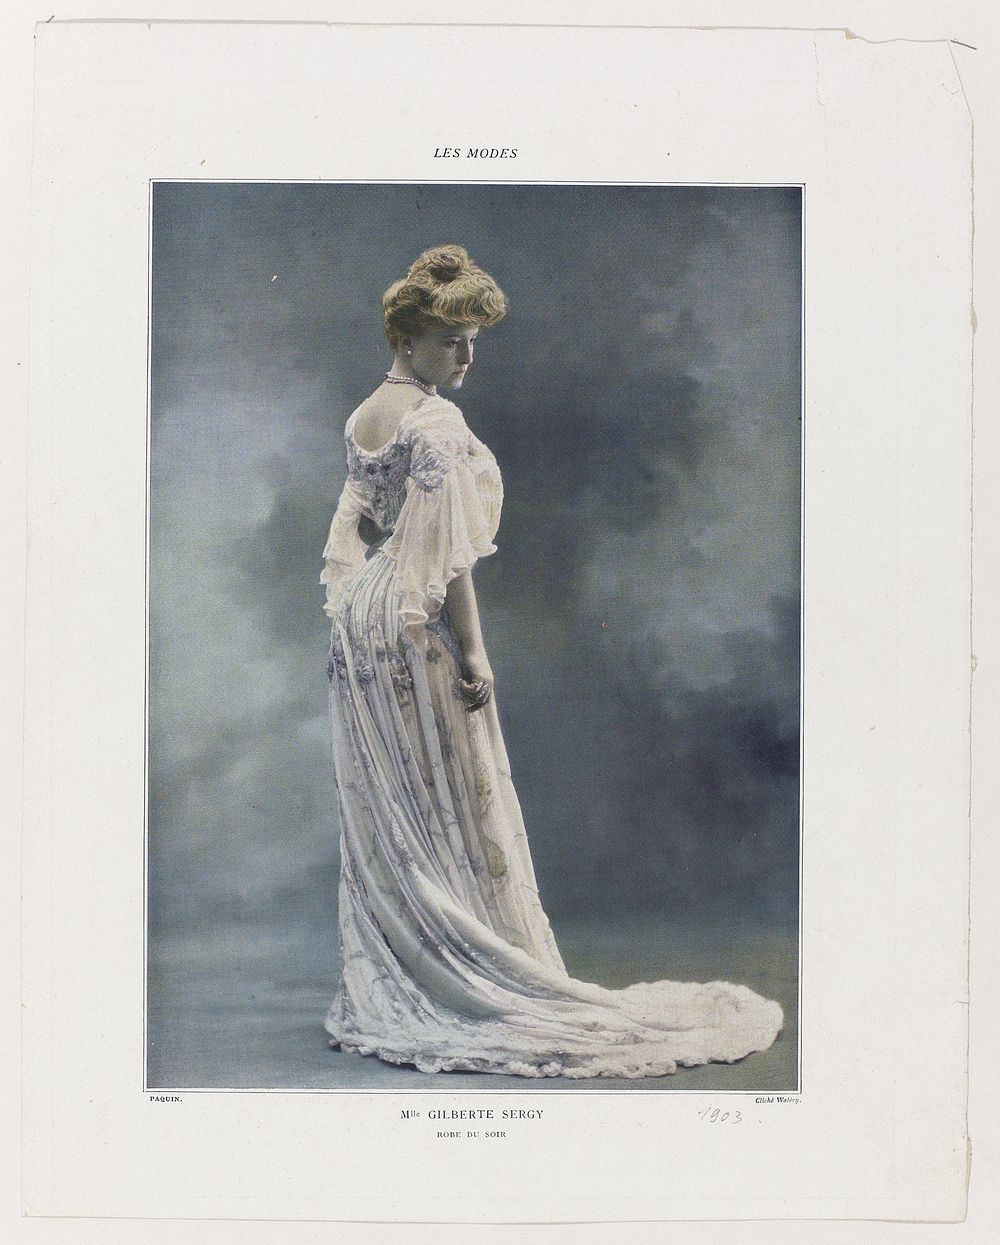 Les Modes, 1903 : Mlle Gilberte Sergy / Robe du soir (1903) by Walery and Jeanne Paquin